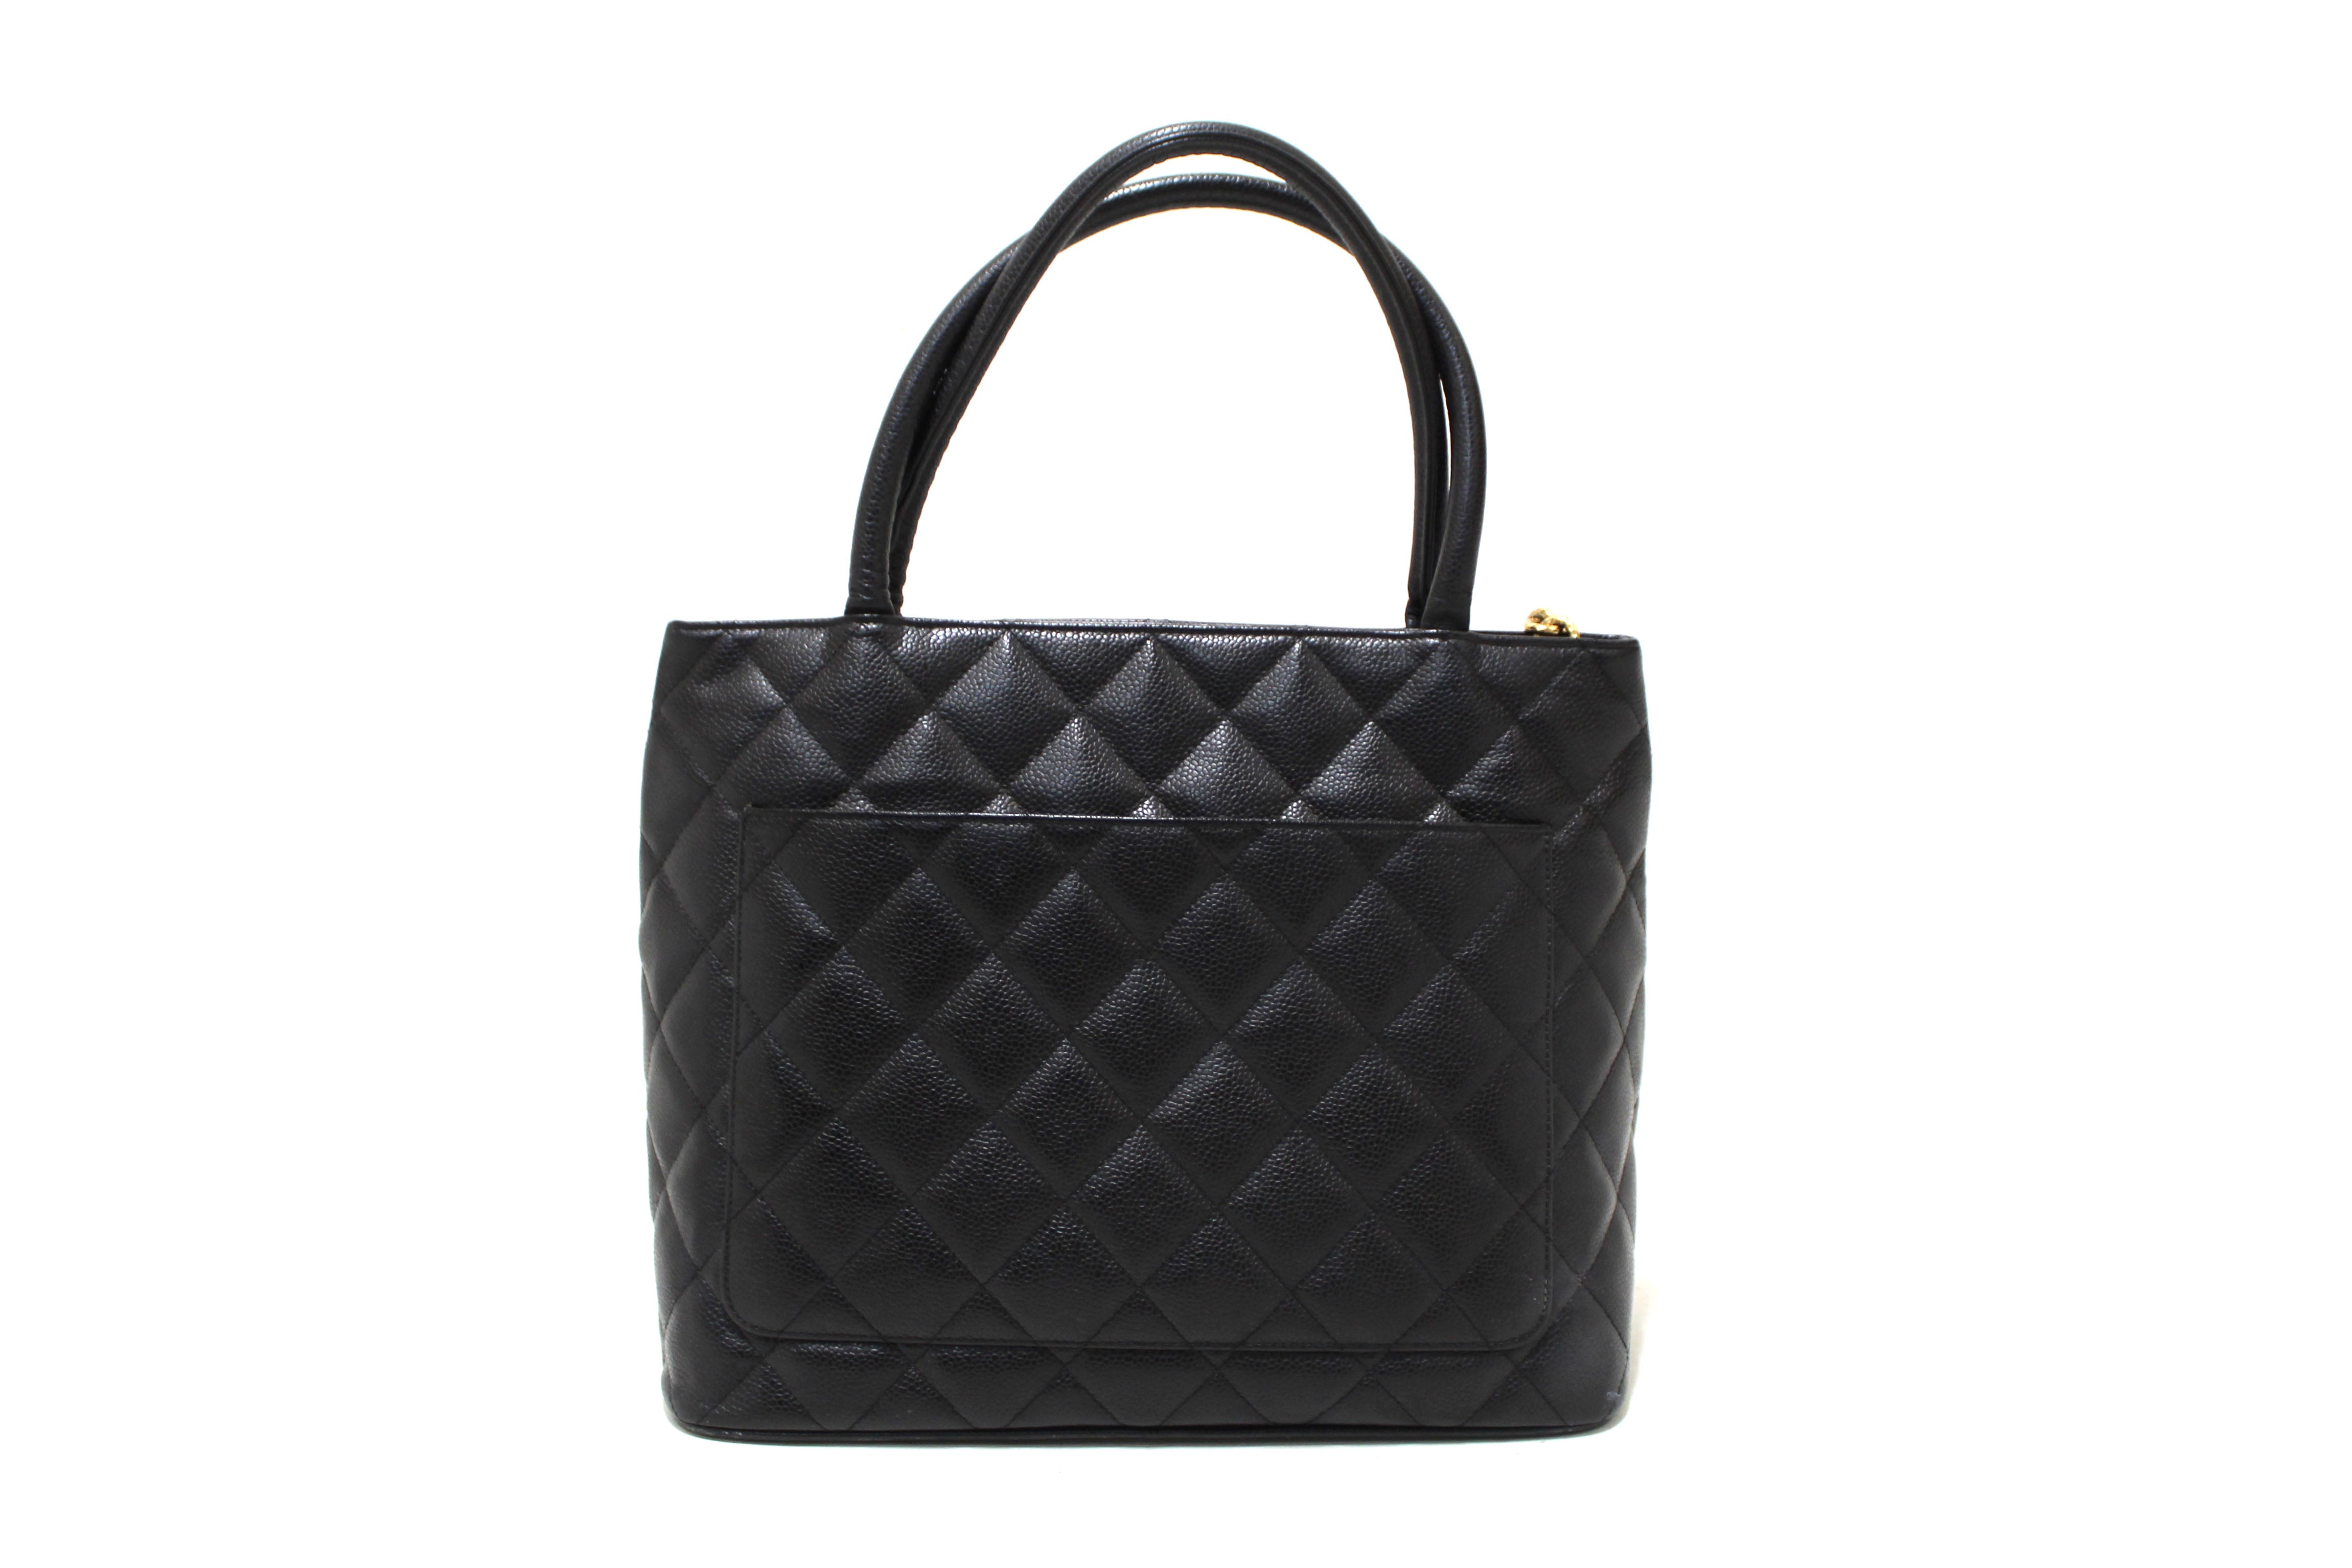 Authentic  Chanel Black Quilted Caviar Leather Medallion Tote Bag